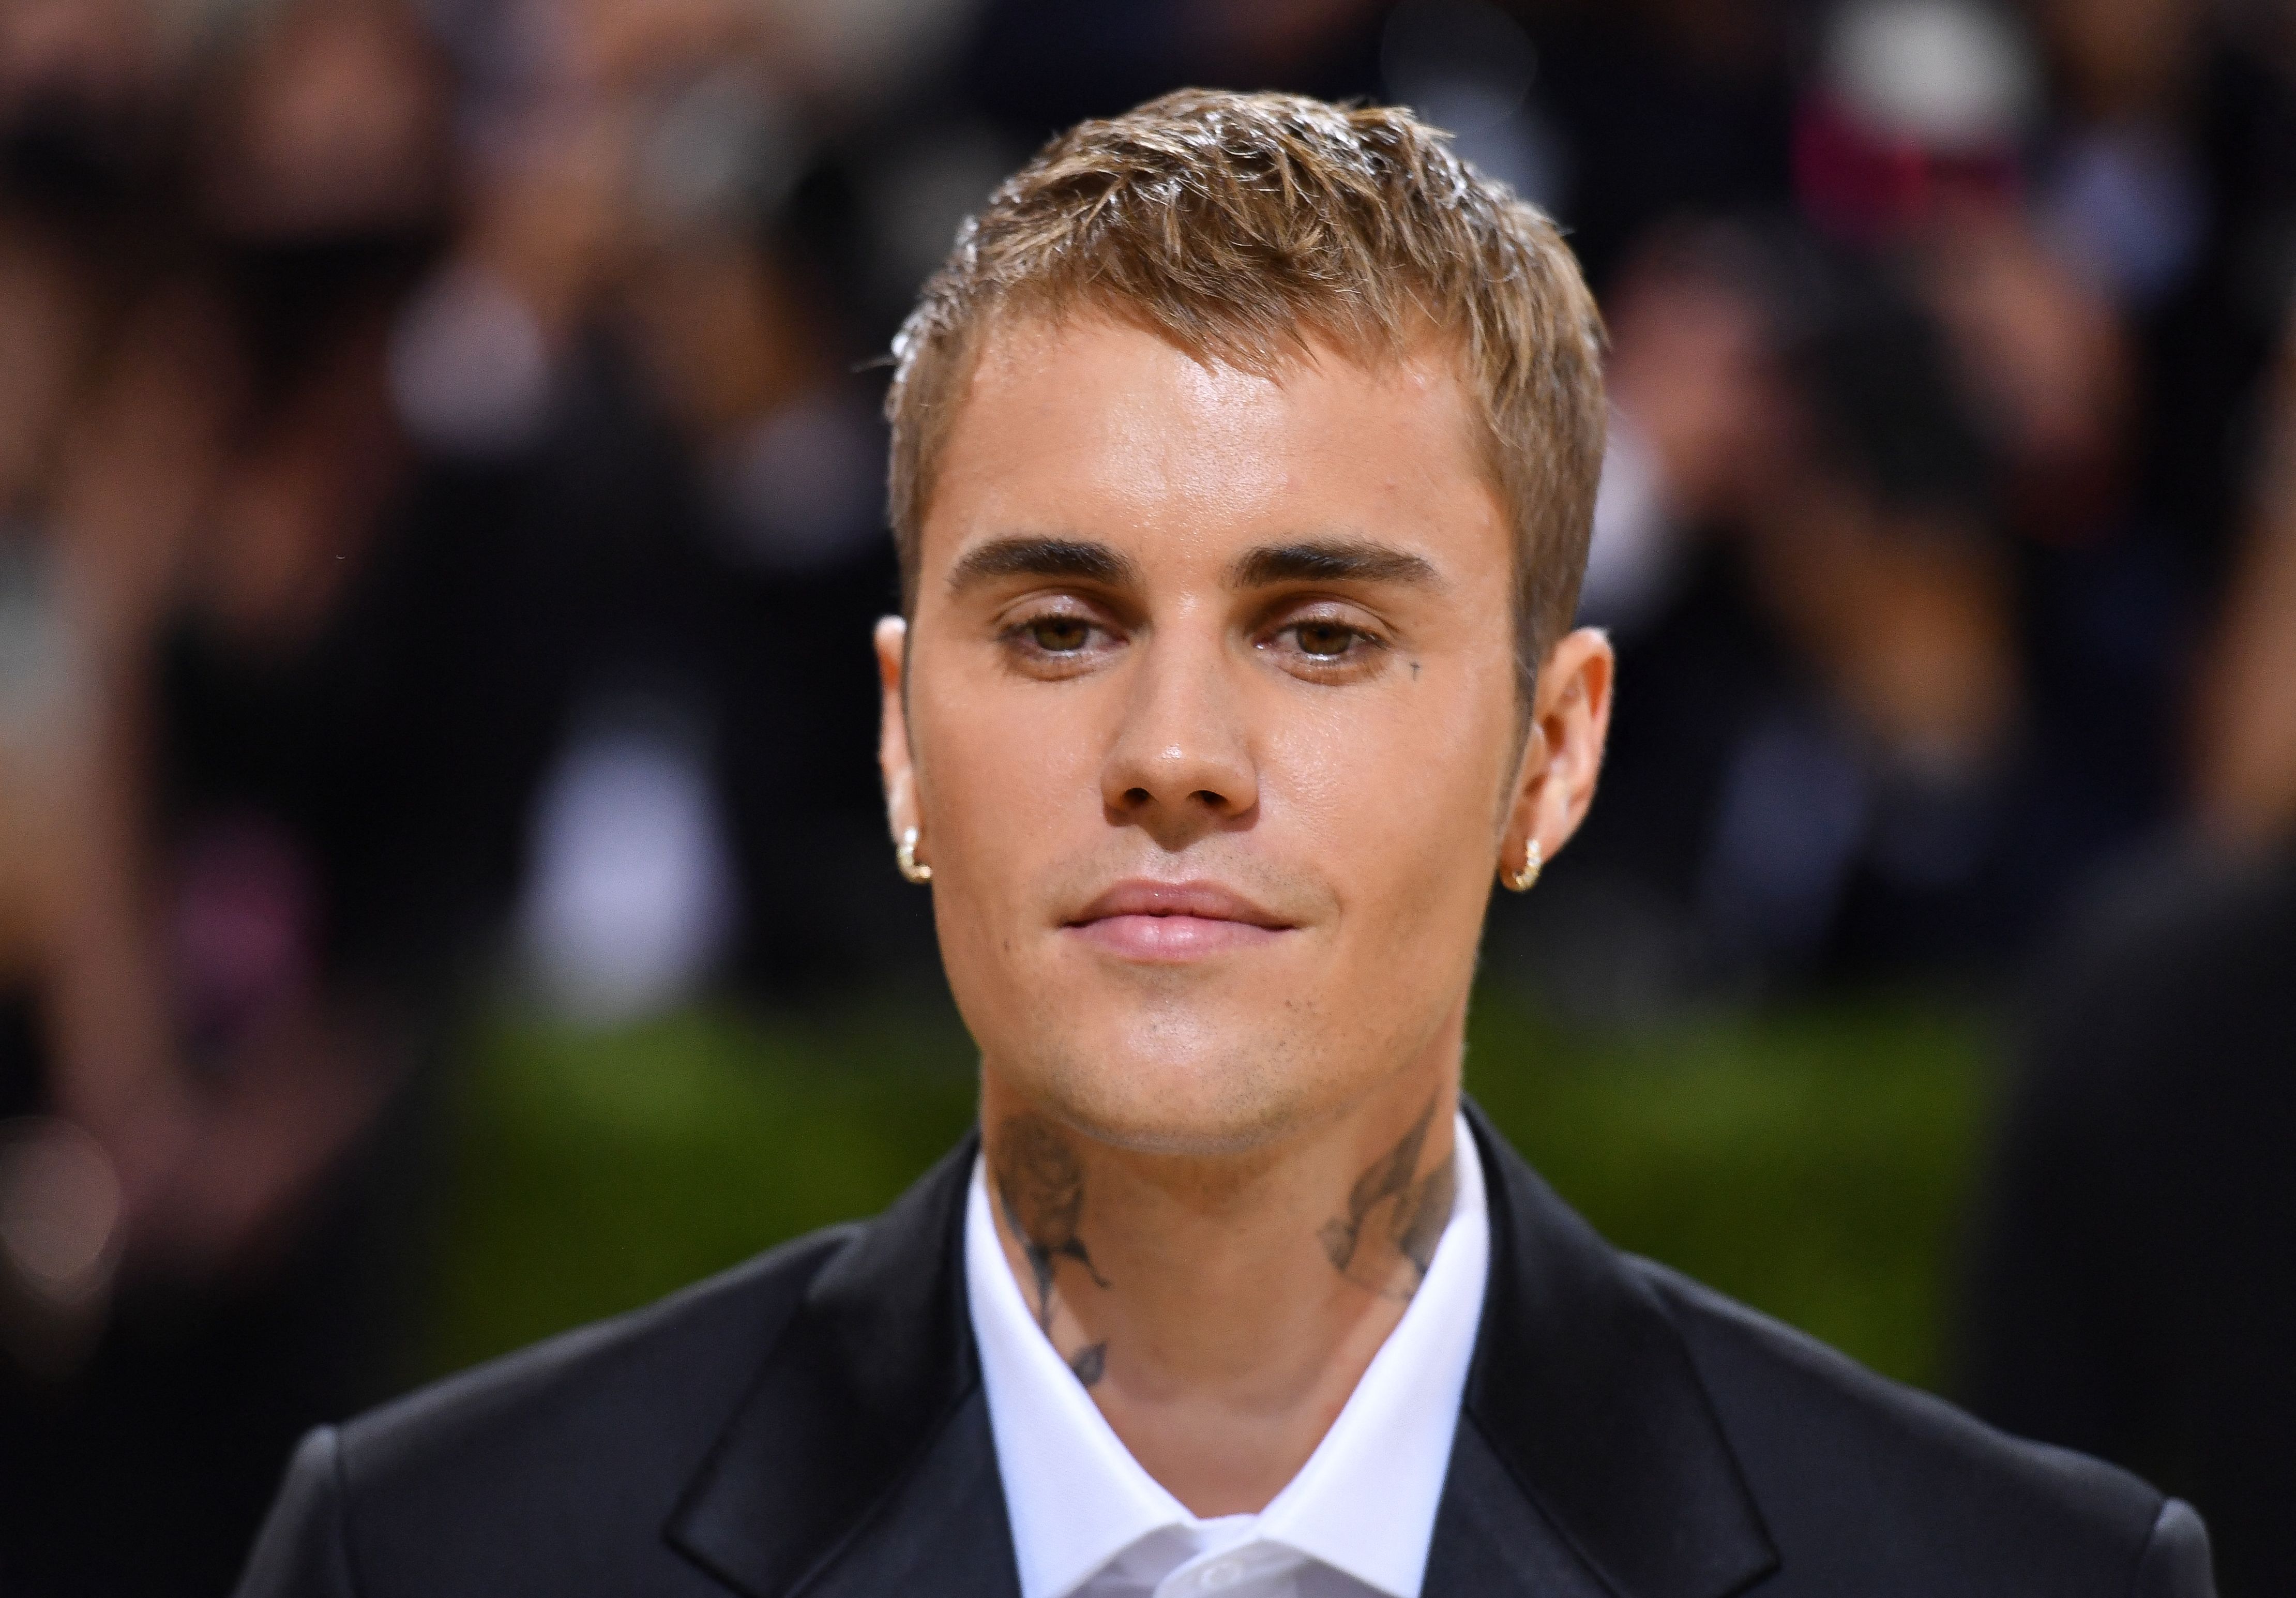 Canadian singer Justin Bieber arrives for the 2021 Met Gala at the Metropolitan Museum of Art on September 13, 2021 in New York. - This year's Met Gala has a distinctively youthful imprint, hosted by singer Billie Eilish, actor Timothee Chalamet, poet Amanda Gorman and tennis star Naomi Osaka, none of them older than 25. The 2021 theme is "In America: A Lexicon of Fashion." (Photo by Angela WEISS / AFP)